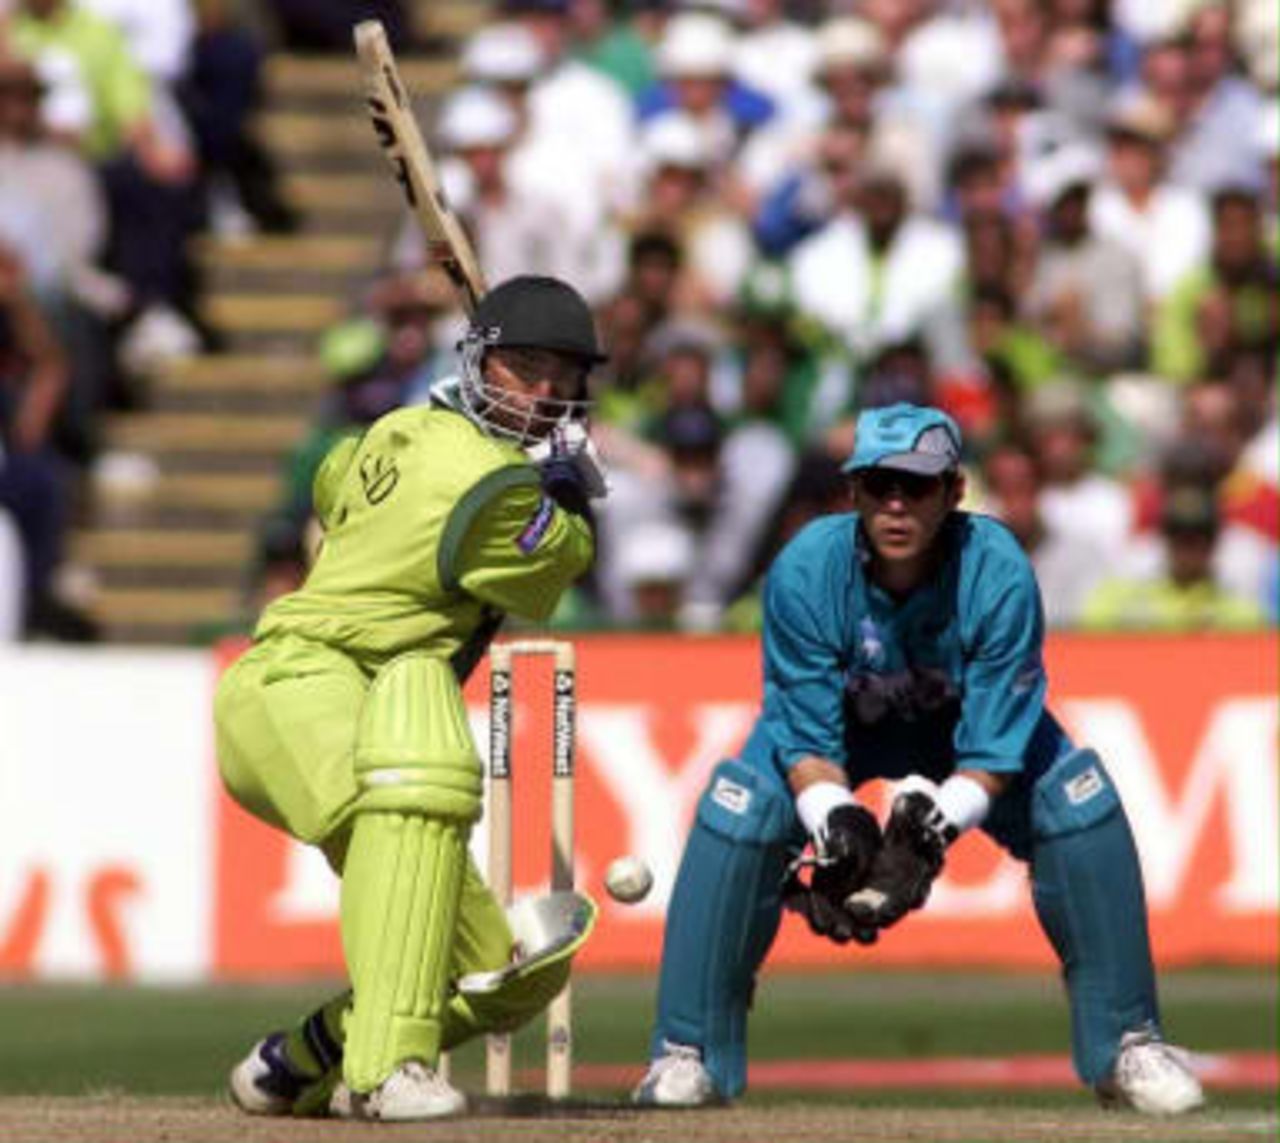 Pakistan batsman Saeed Anwar hits a four on his way to his century during the Cricket World Cup semi final at Old Trafford, Manchester, 16 June 1999.